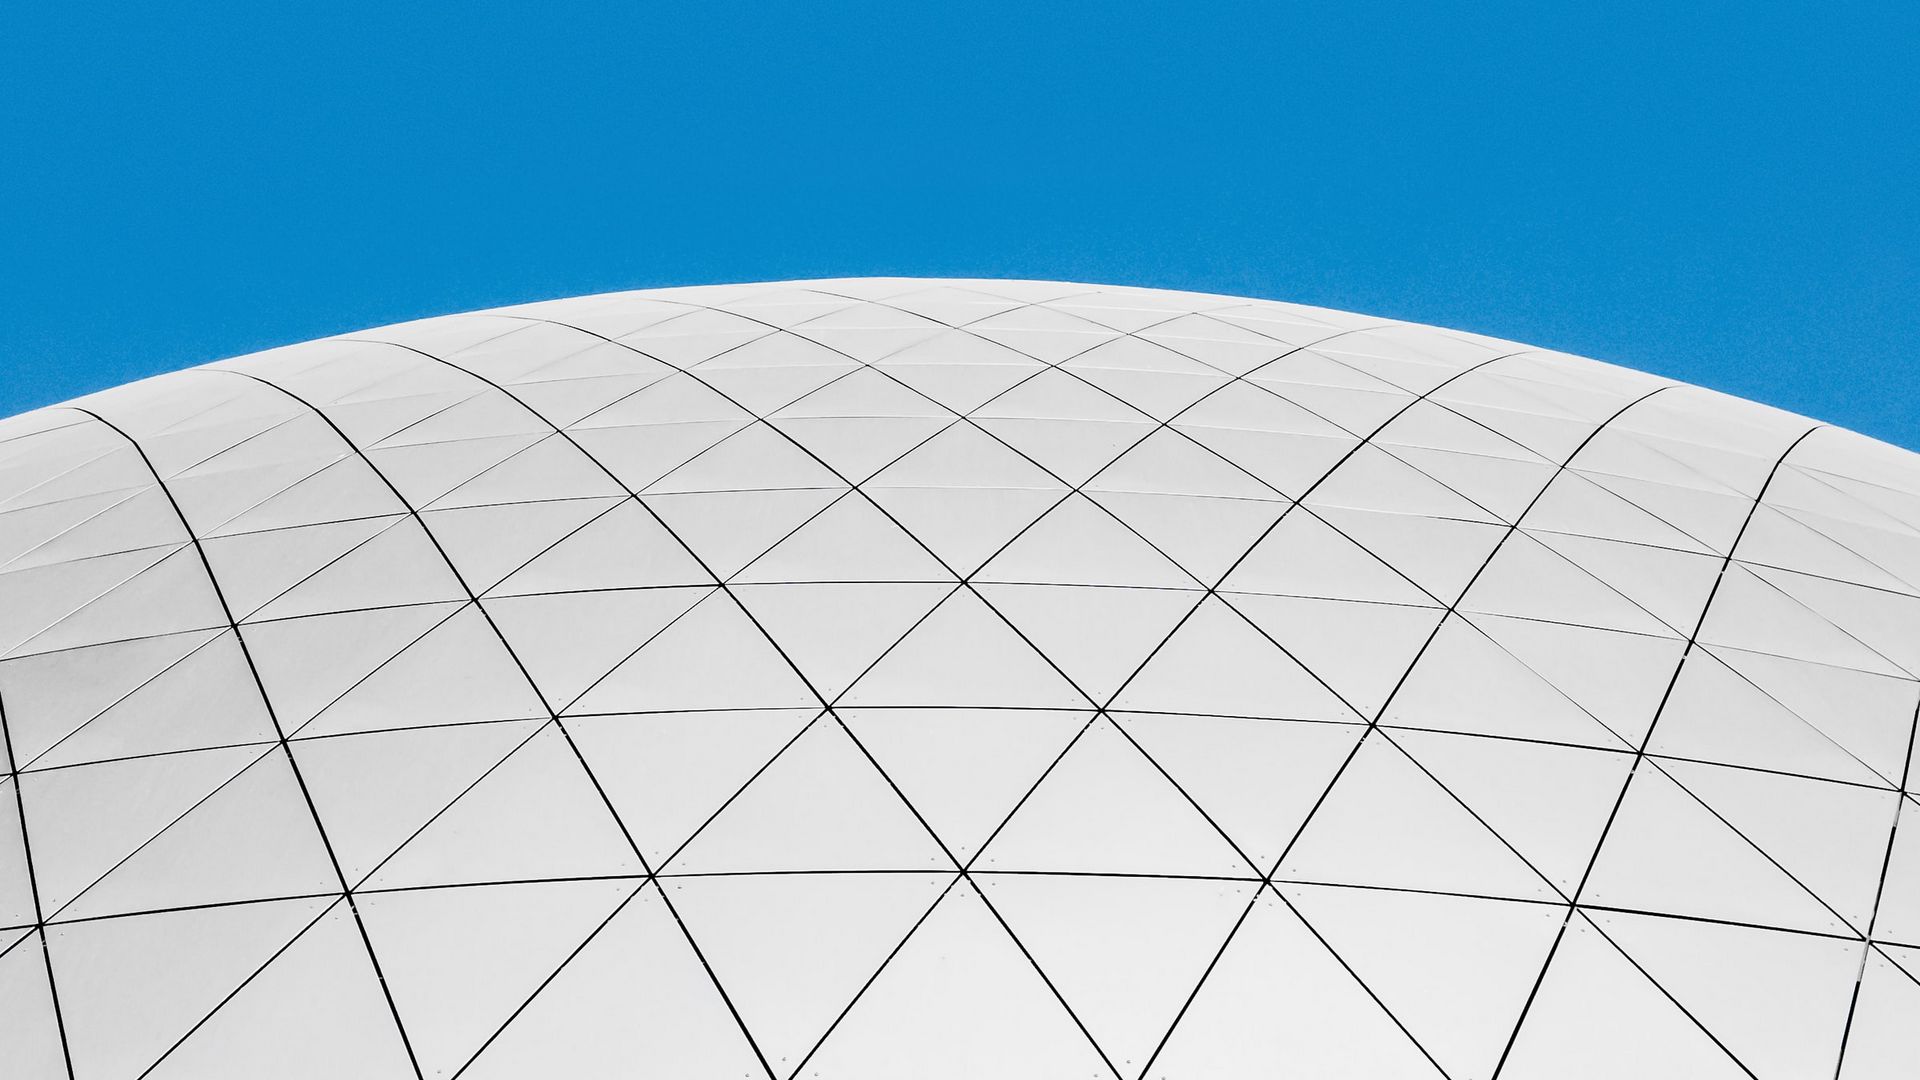 Download wallpaper 1920x1080 cupola, building, surface, sky full hd ...